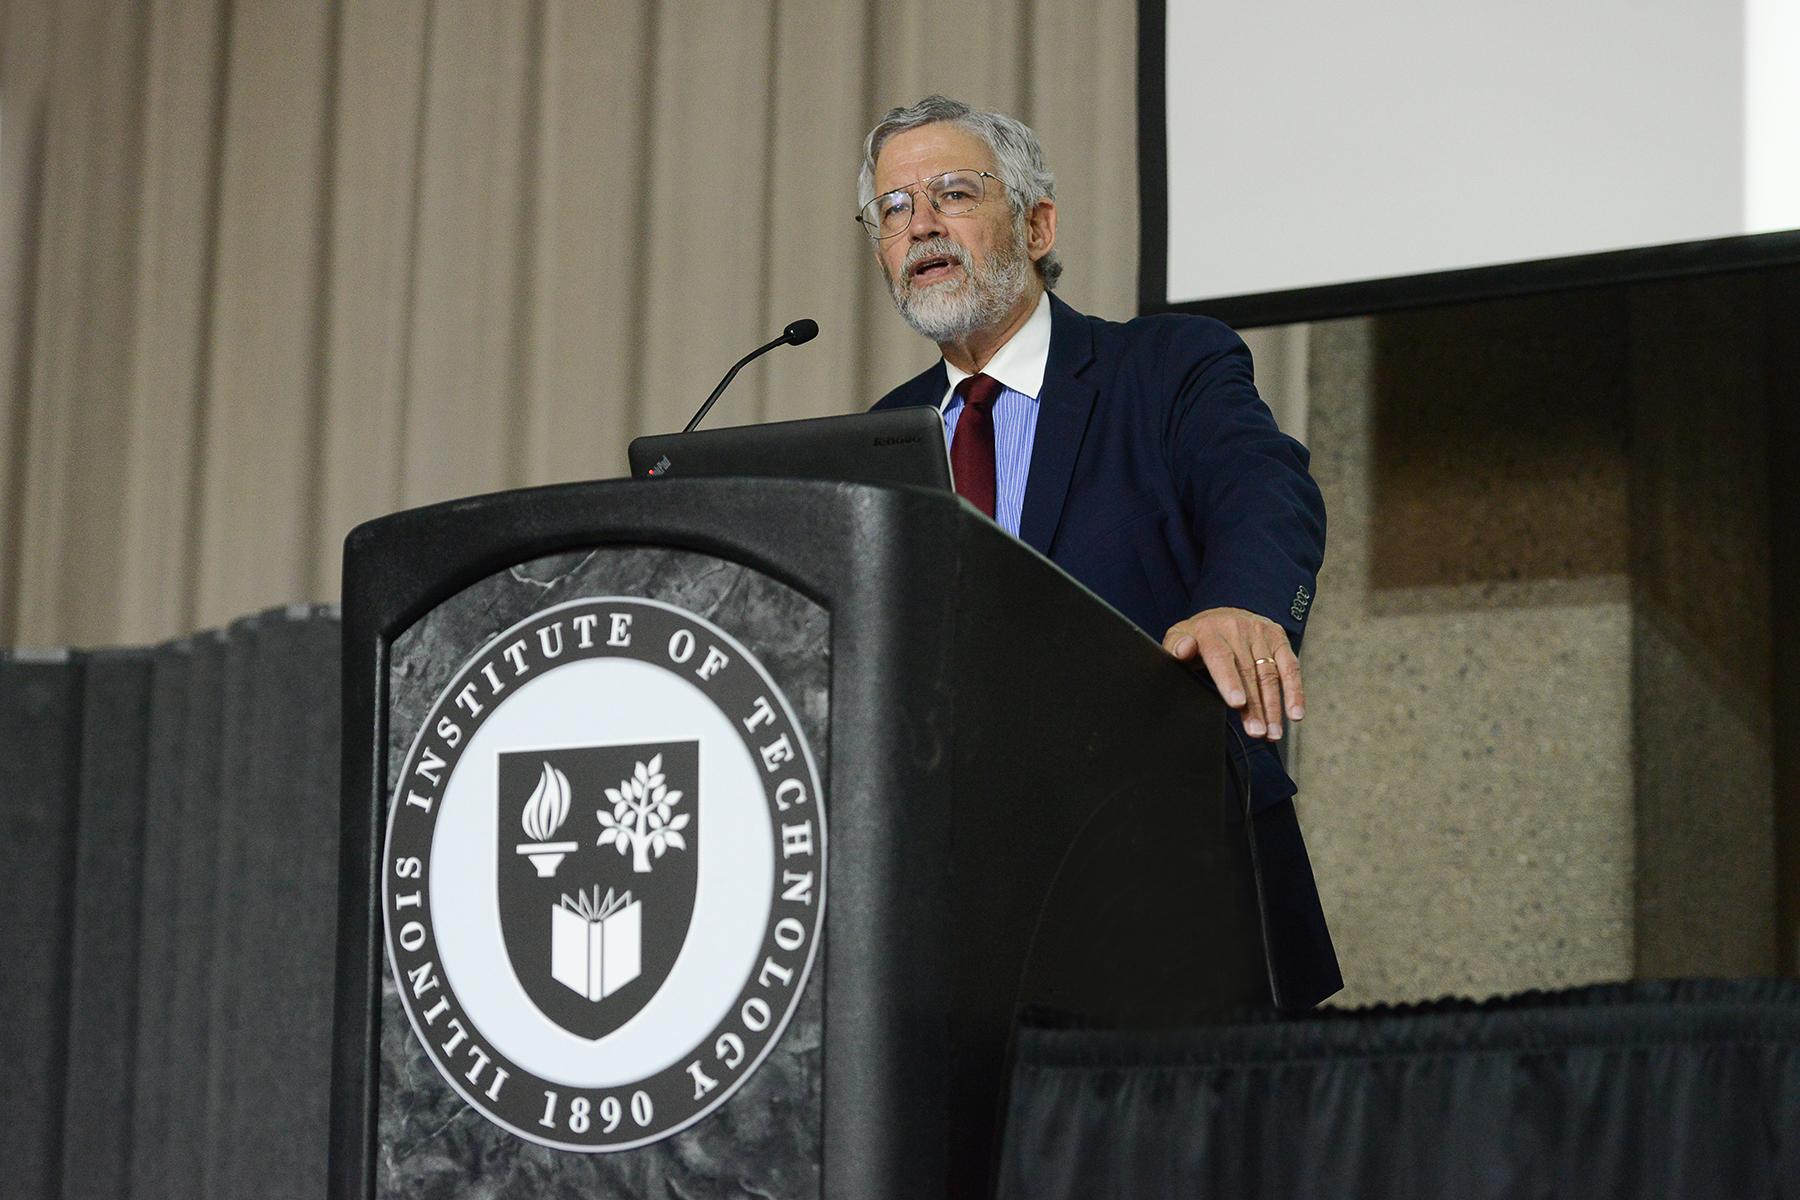 John P. Holdren, President Barack Obama’s science and technology adviser from 2009-2017, gives a lecture on climate change Oct. 19 at the Illinois Institute of Technology. (Bonnie Robinson / Illinois Institute of Technology)